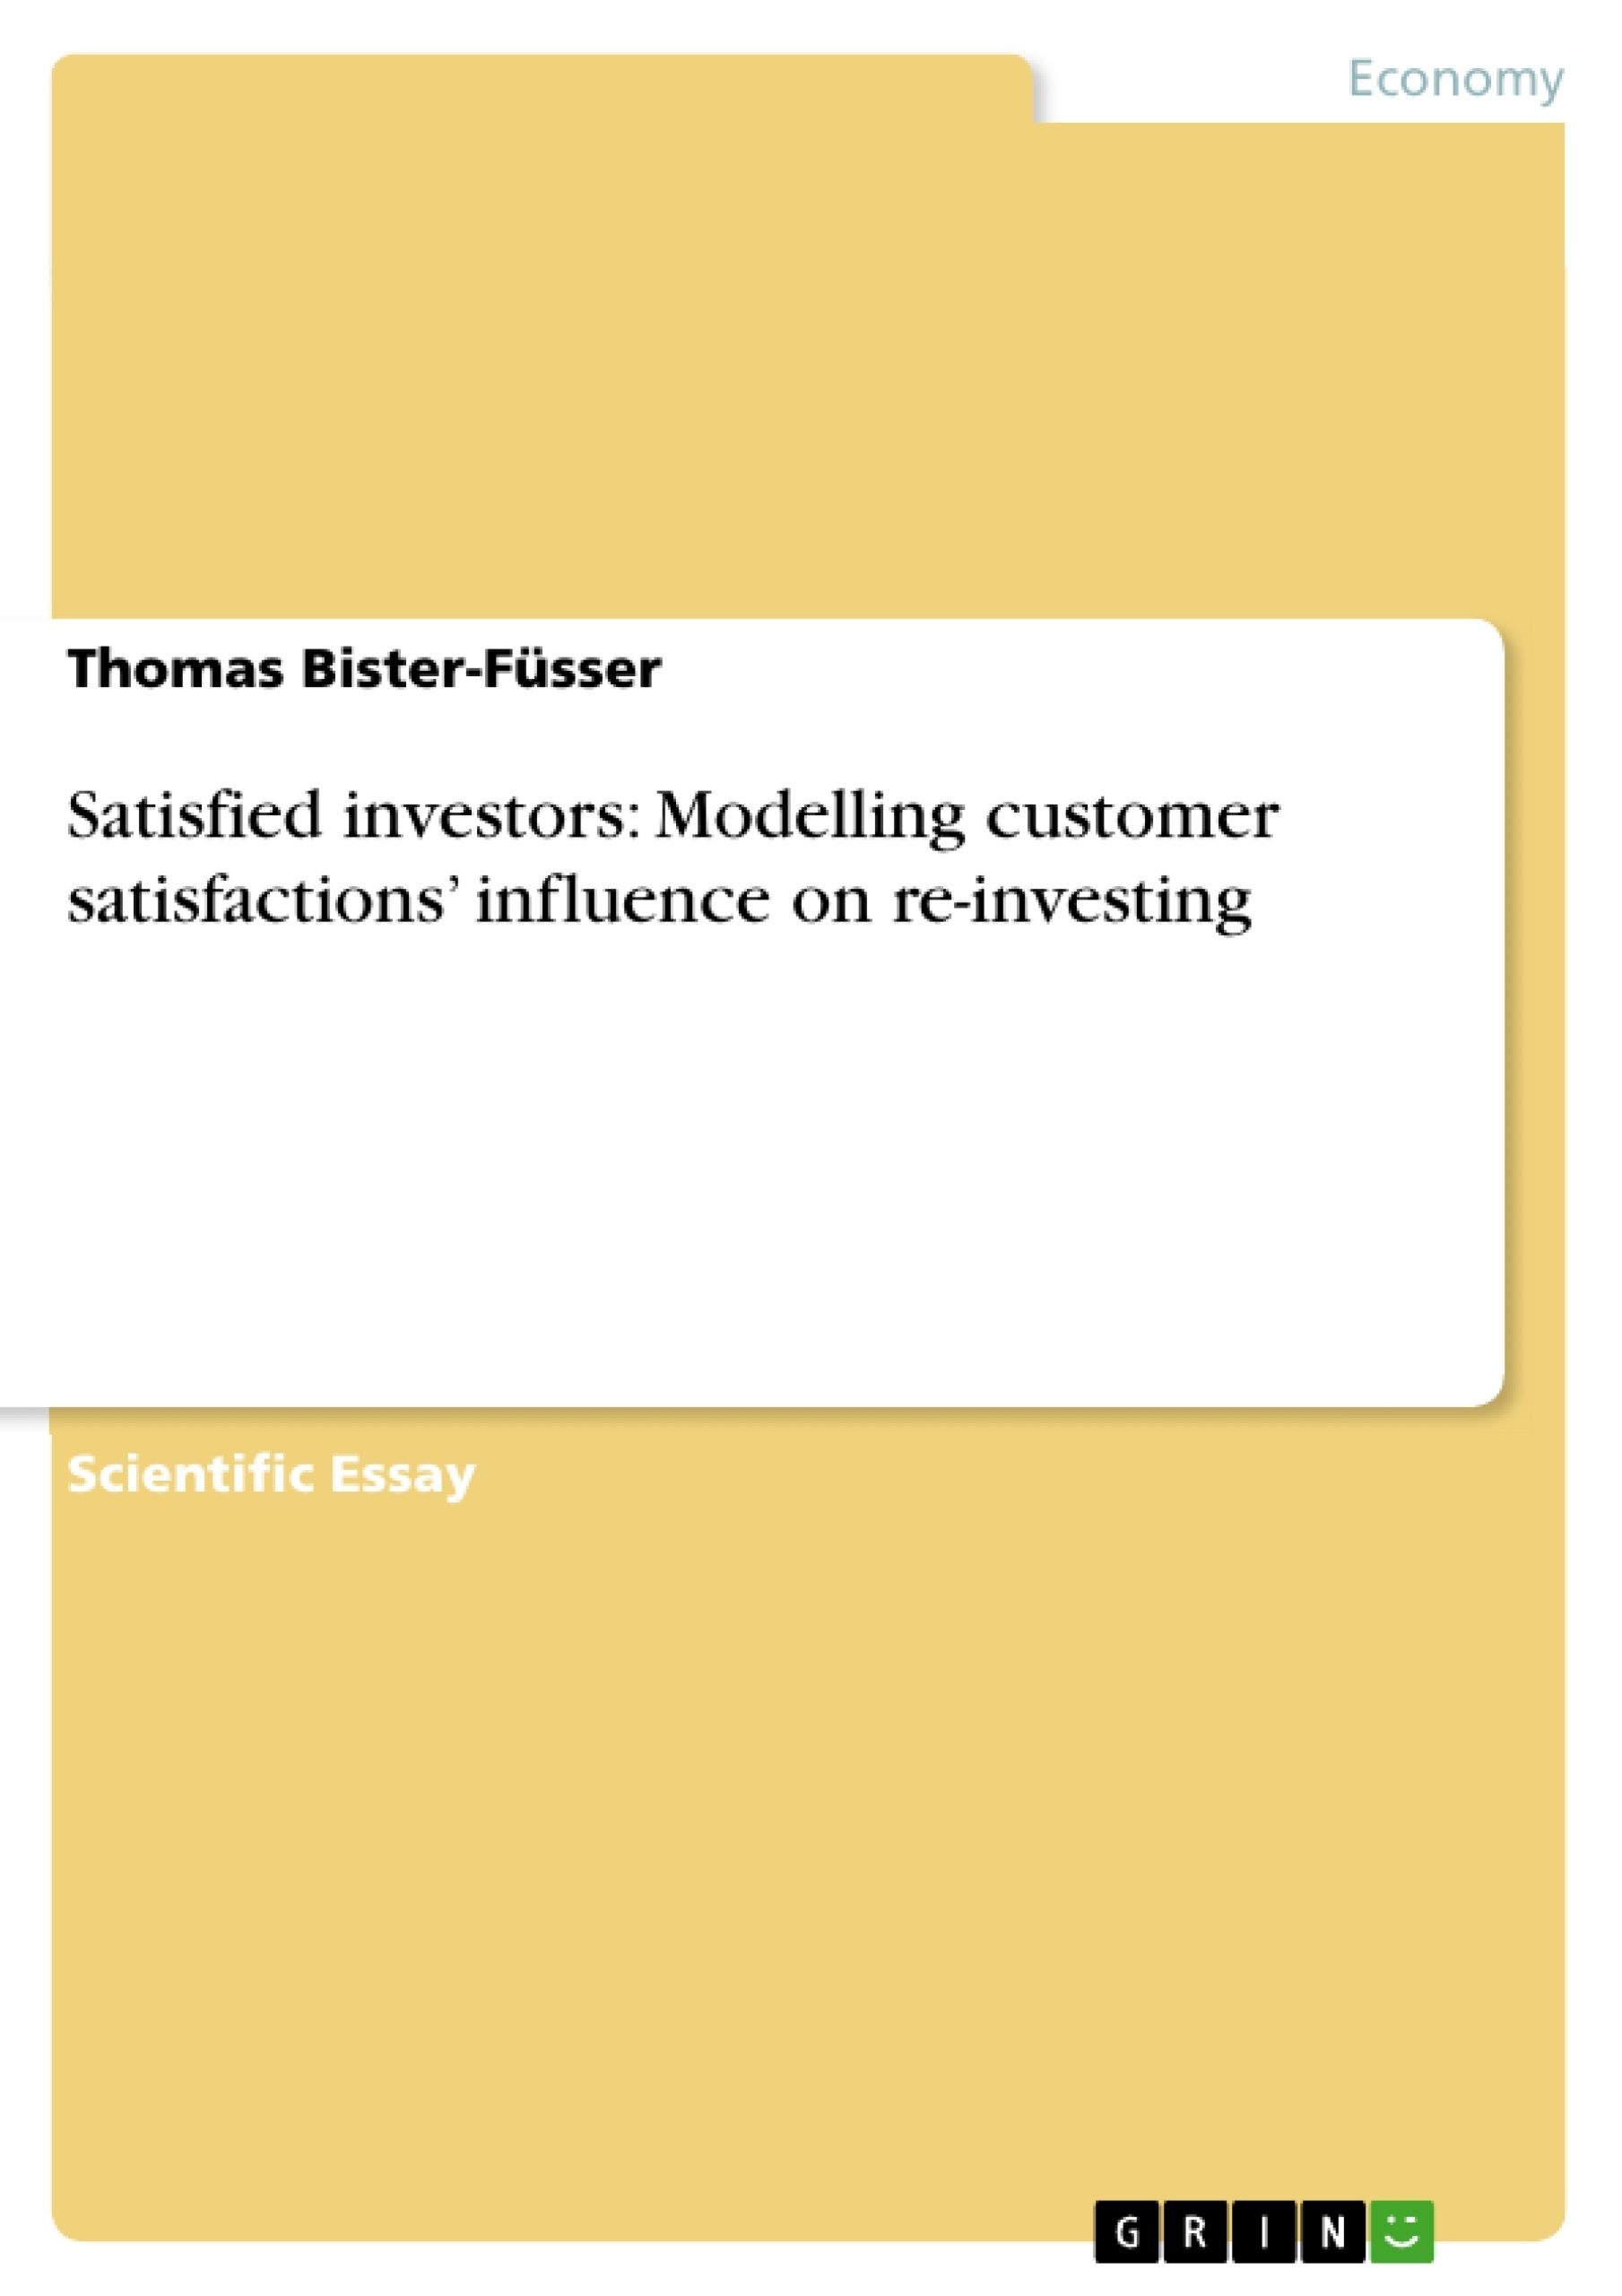 Titre: Satisfied investors: Modelling customer satisfactions’ influence on re-investing